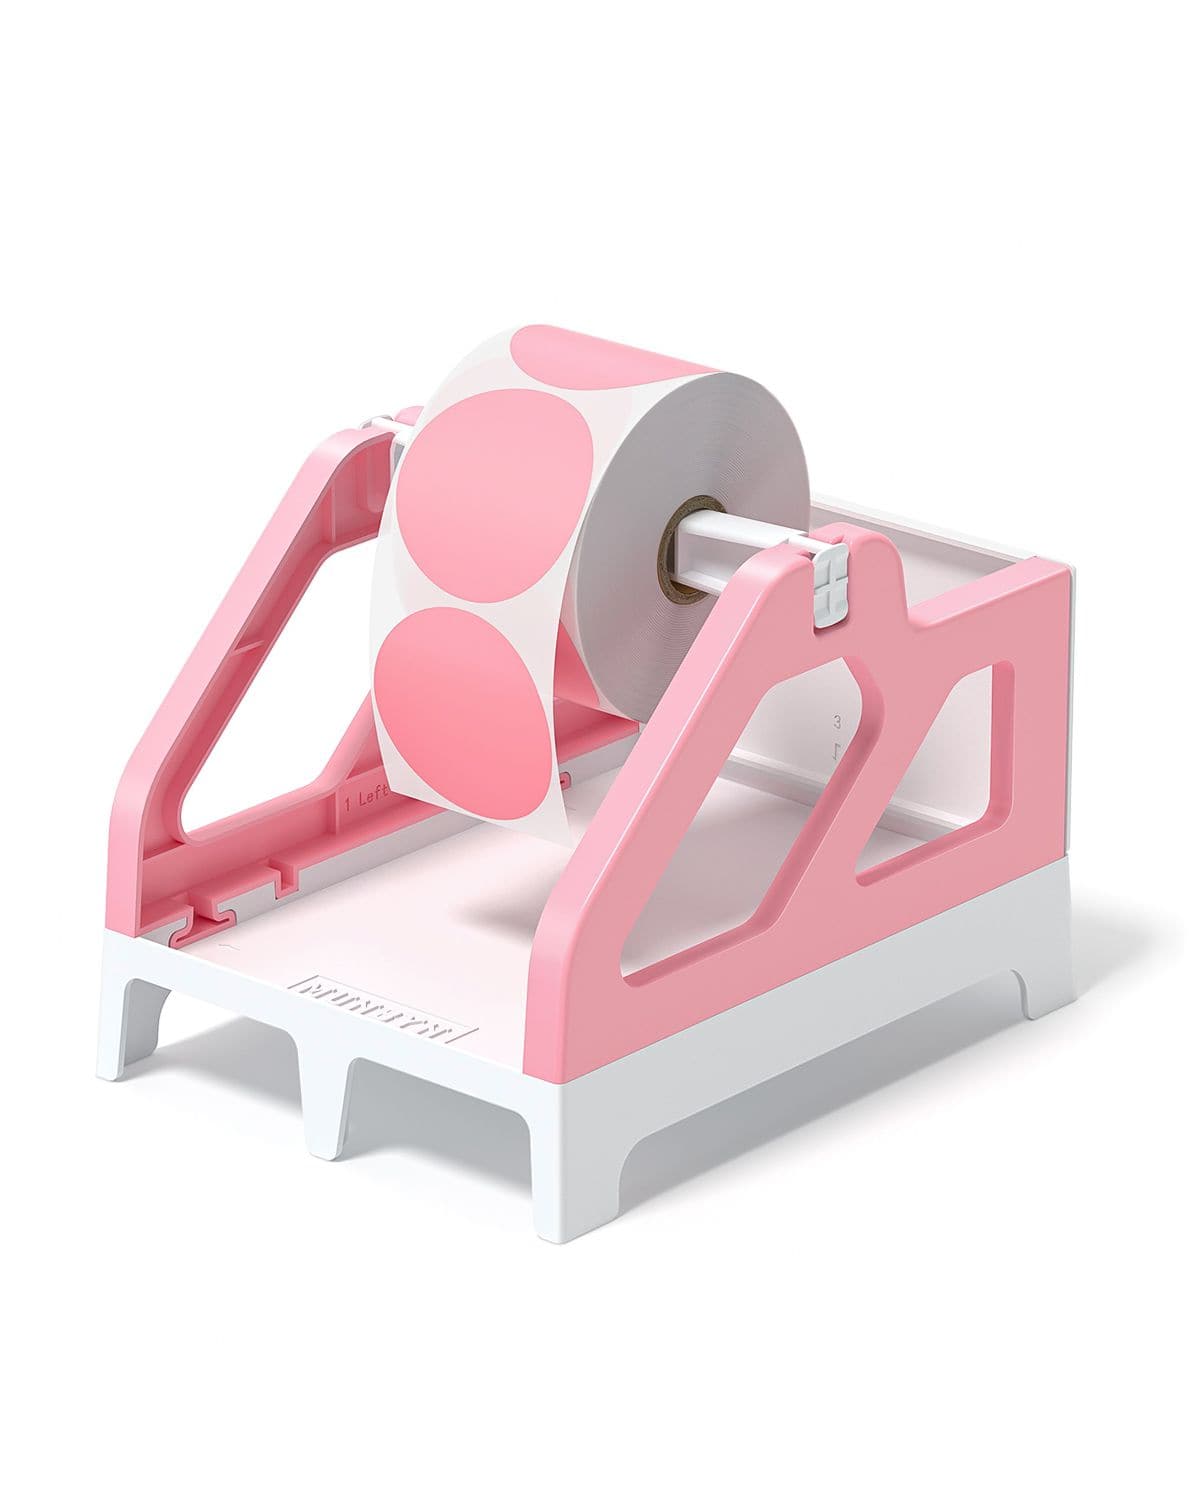 There is a roll of pink circle labels on the MUNBYN pink and white plastic label roll holder.